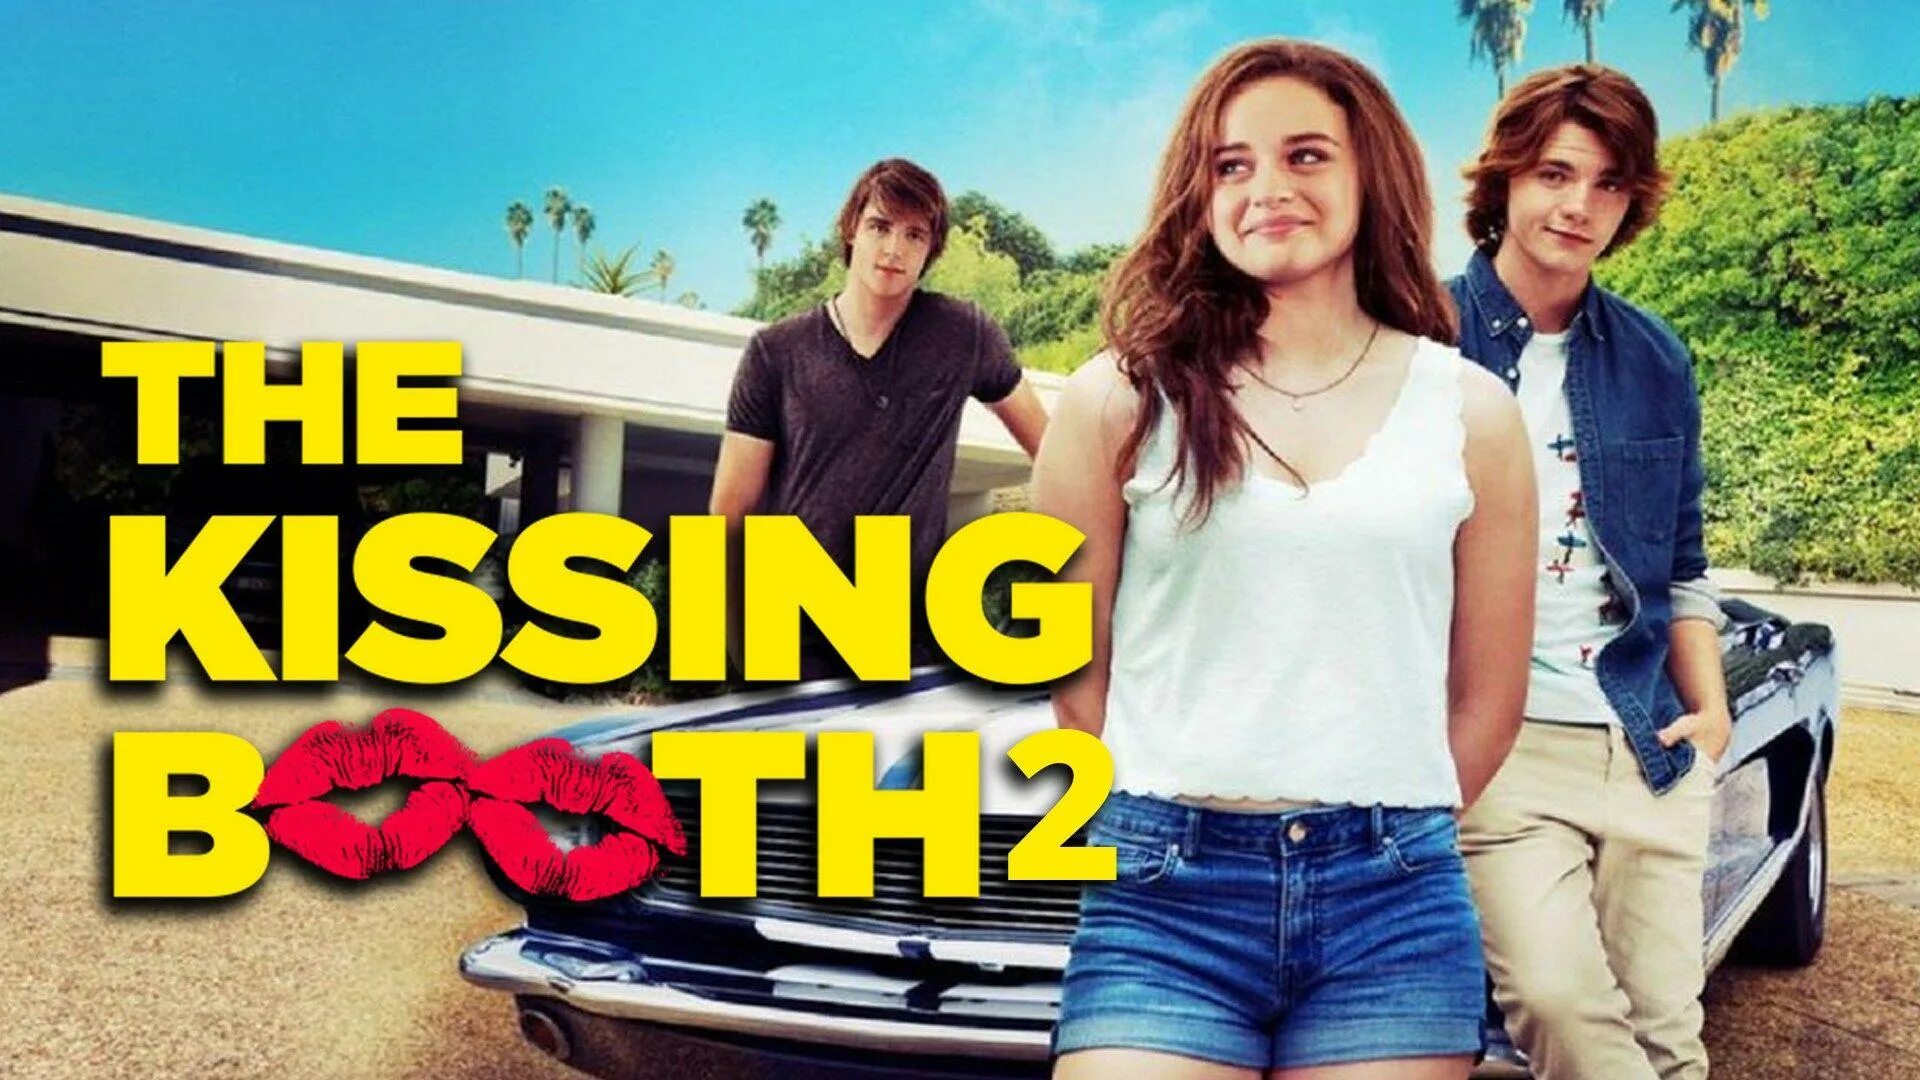 The kissing Booth 2. The kissing Booth poster. The kissing Booth обои. Kissing Booth 1 poster. The kiss booth